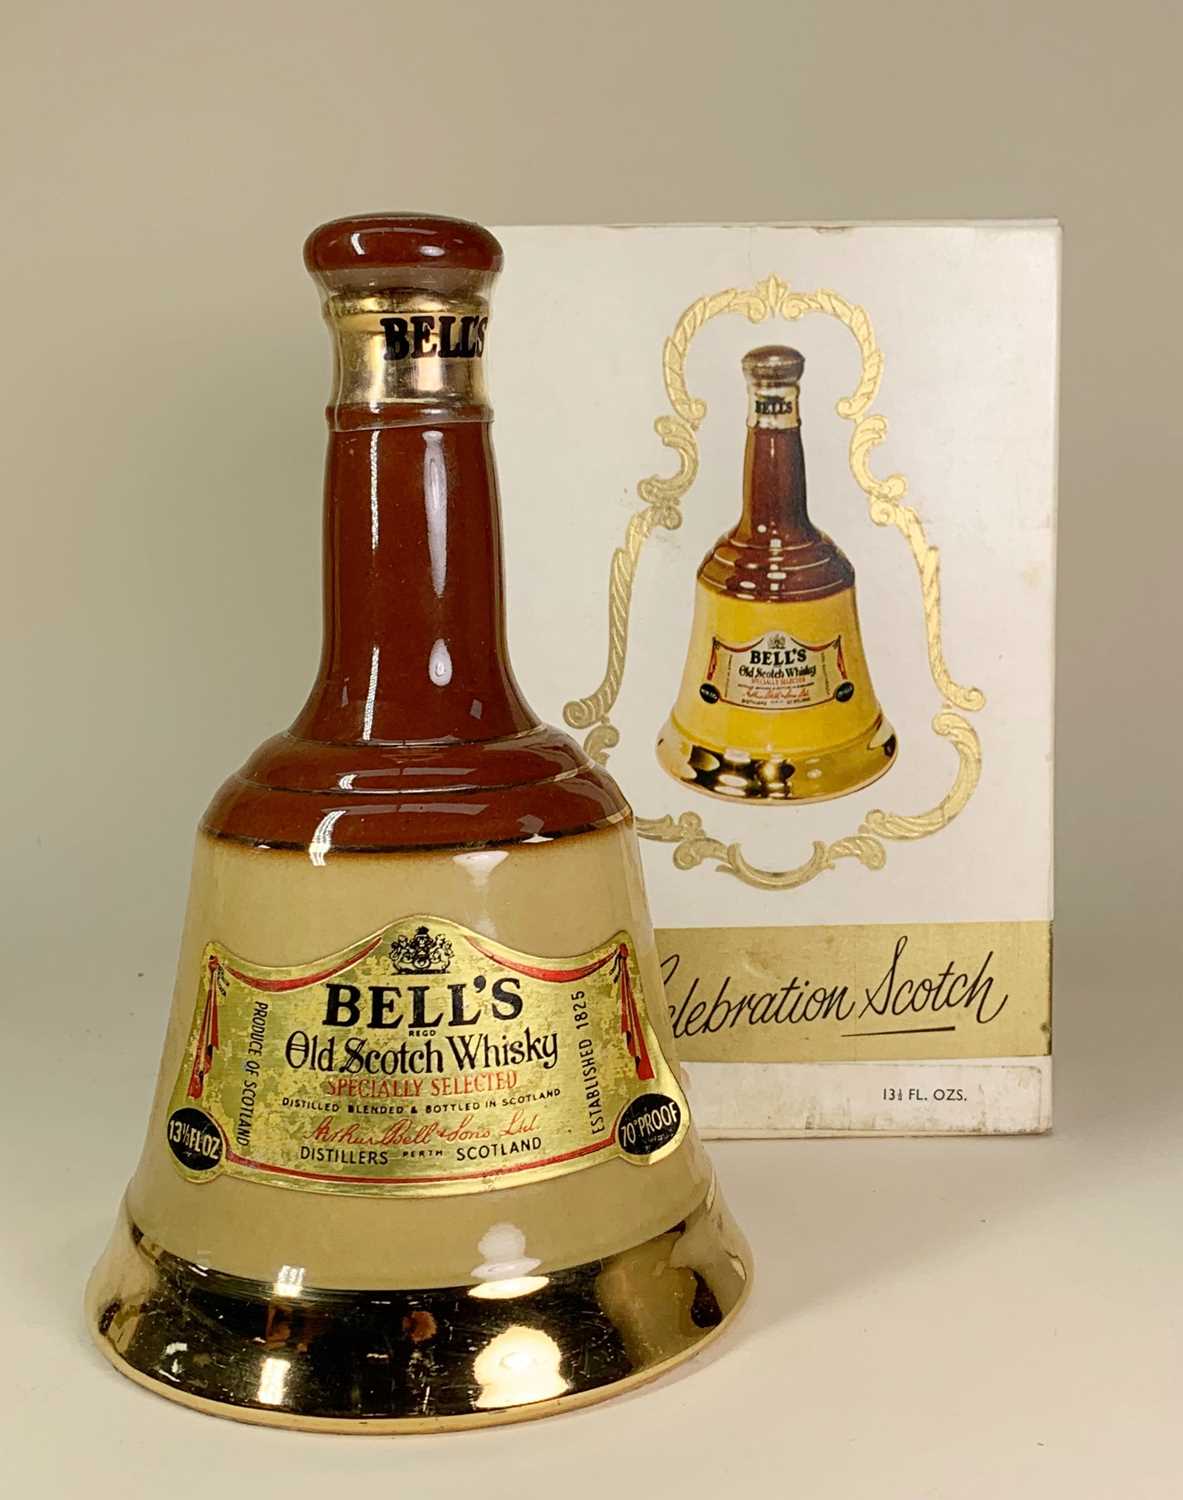 TWO RARE 1970'S WADE BELL'S WHISKY DECANTERS, one 6 2/3rds fl.ozs, one 13 1/3rd fl.ozs, both 70˚ - Image 3 of 3